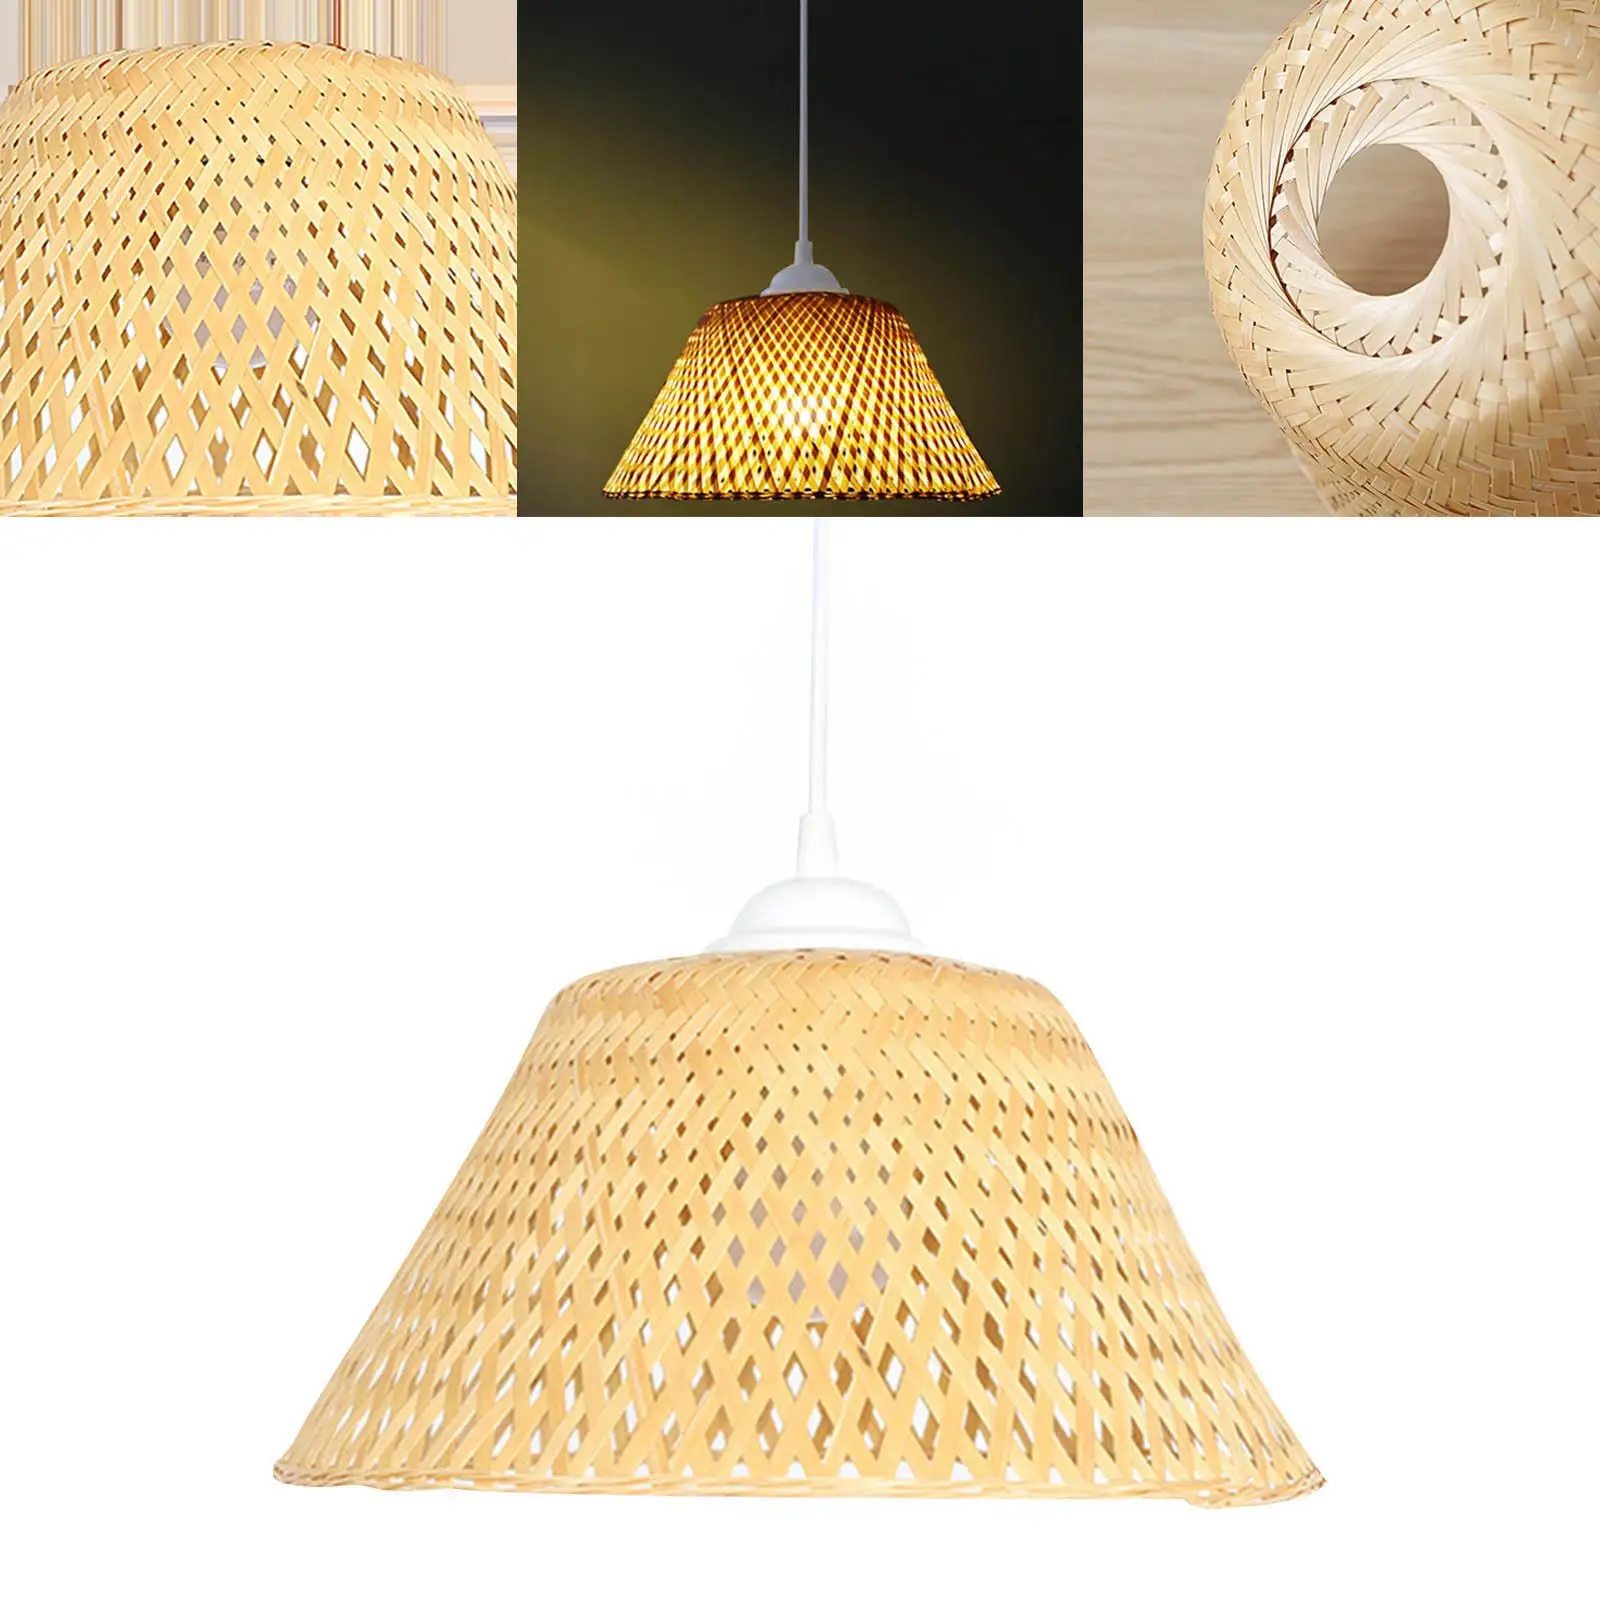 Vintage Style Weave Light Bulb Cage Guard Bamboo Pendant Light Shade Ceiling Fan Light Bulb Cover for Club Bar Dining Room Cafe